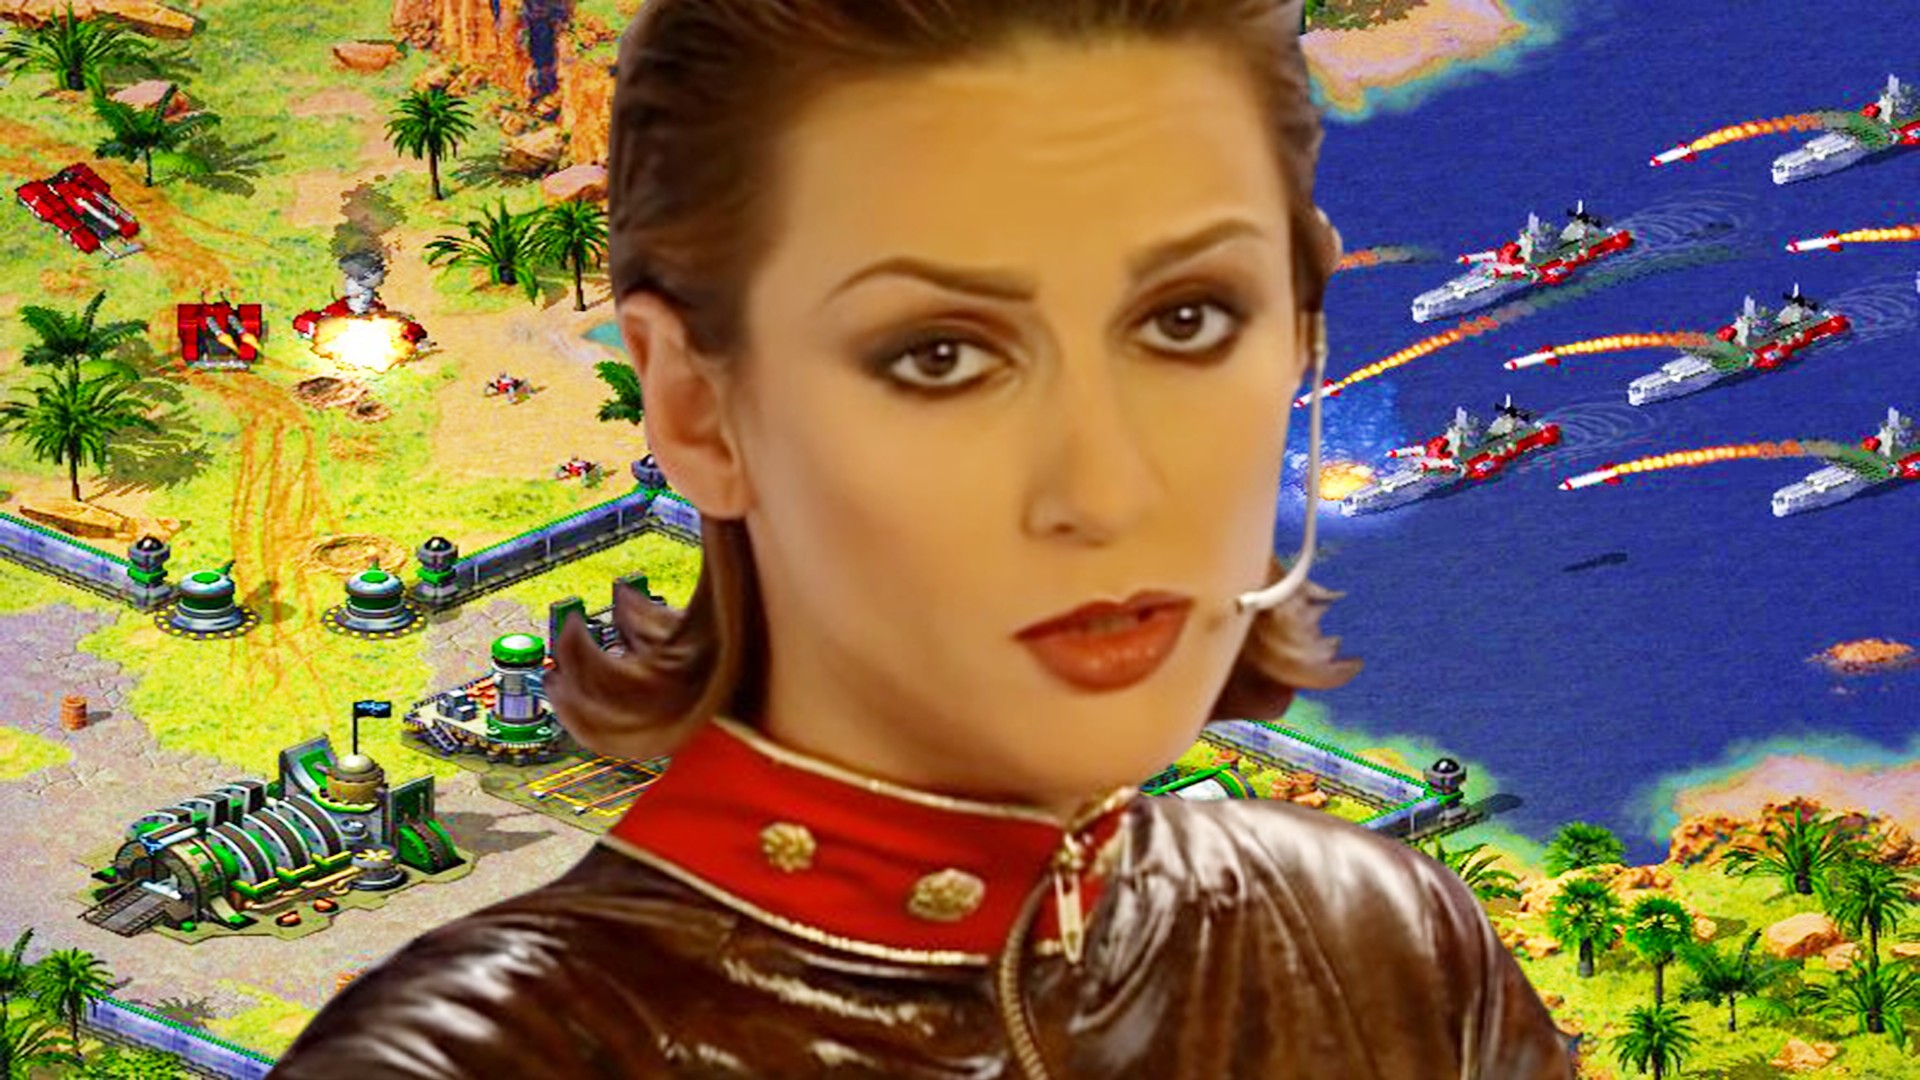 We all want Command and Conquer Red Alert to come back, but not like this